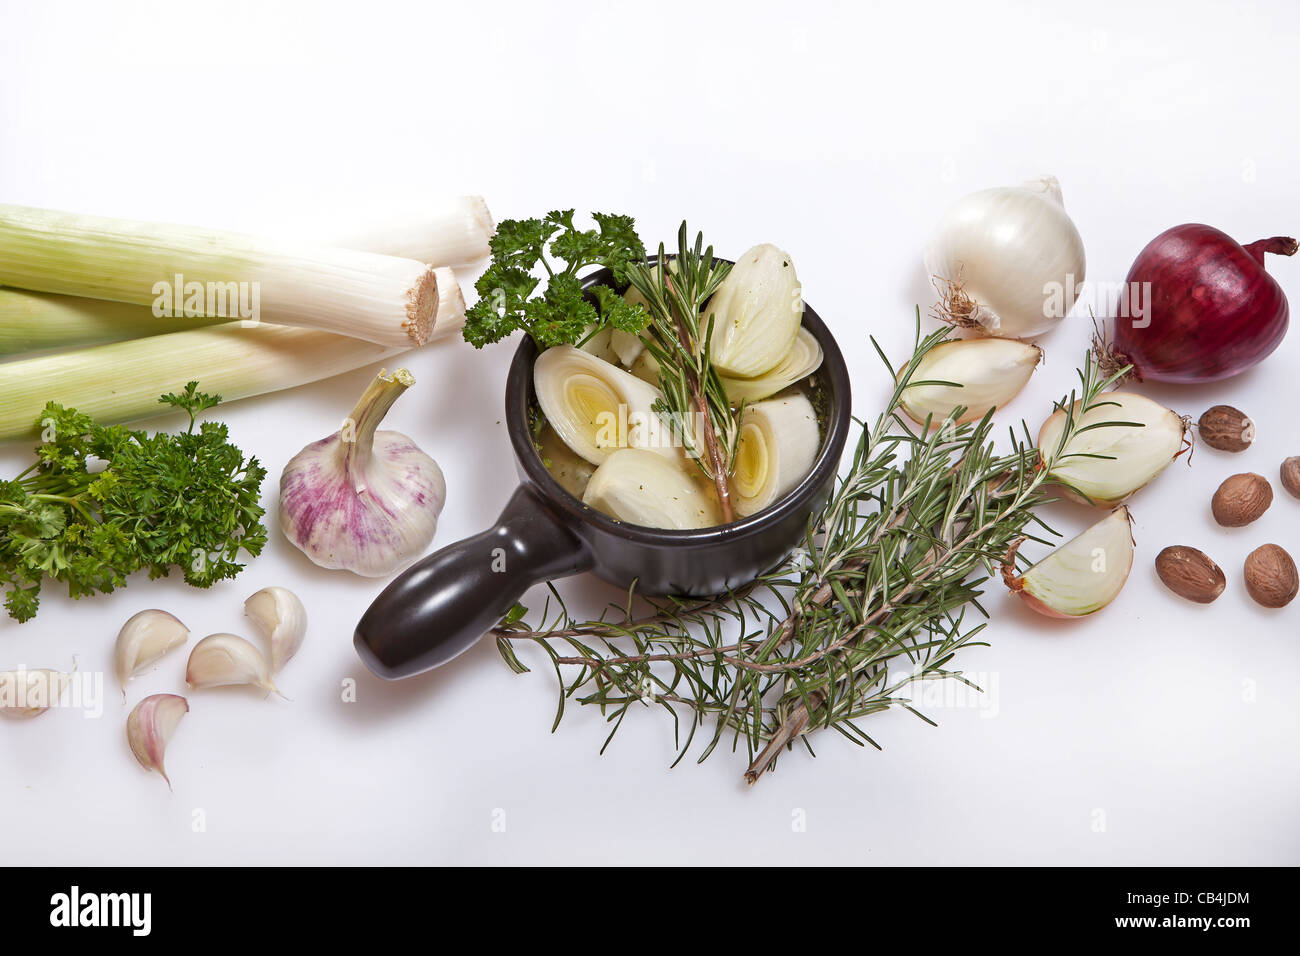 Preparation and ingredients for a fresh leek and onion soup  Stock Photo